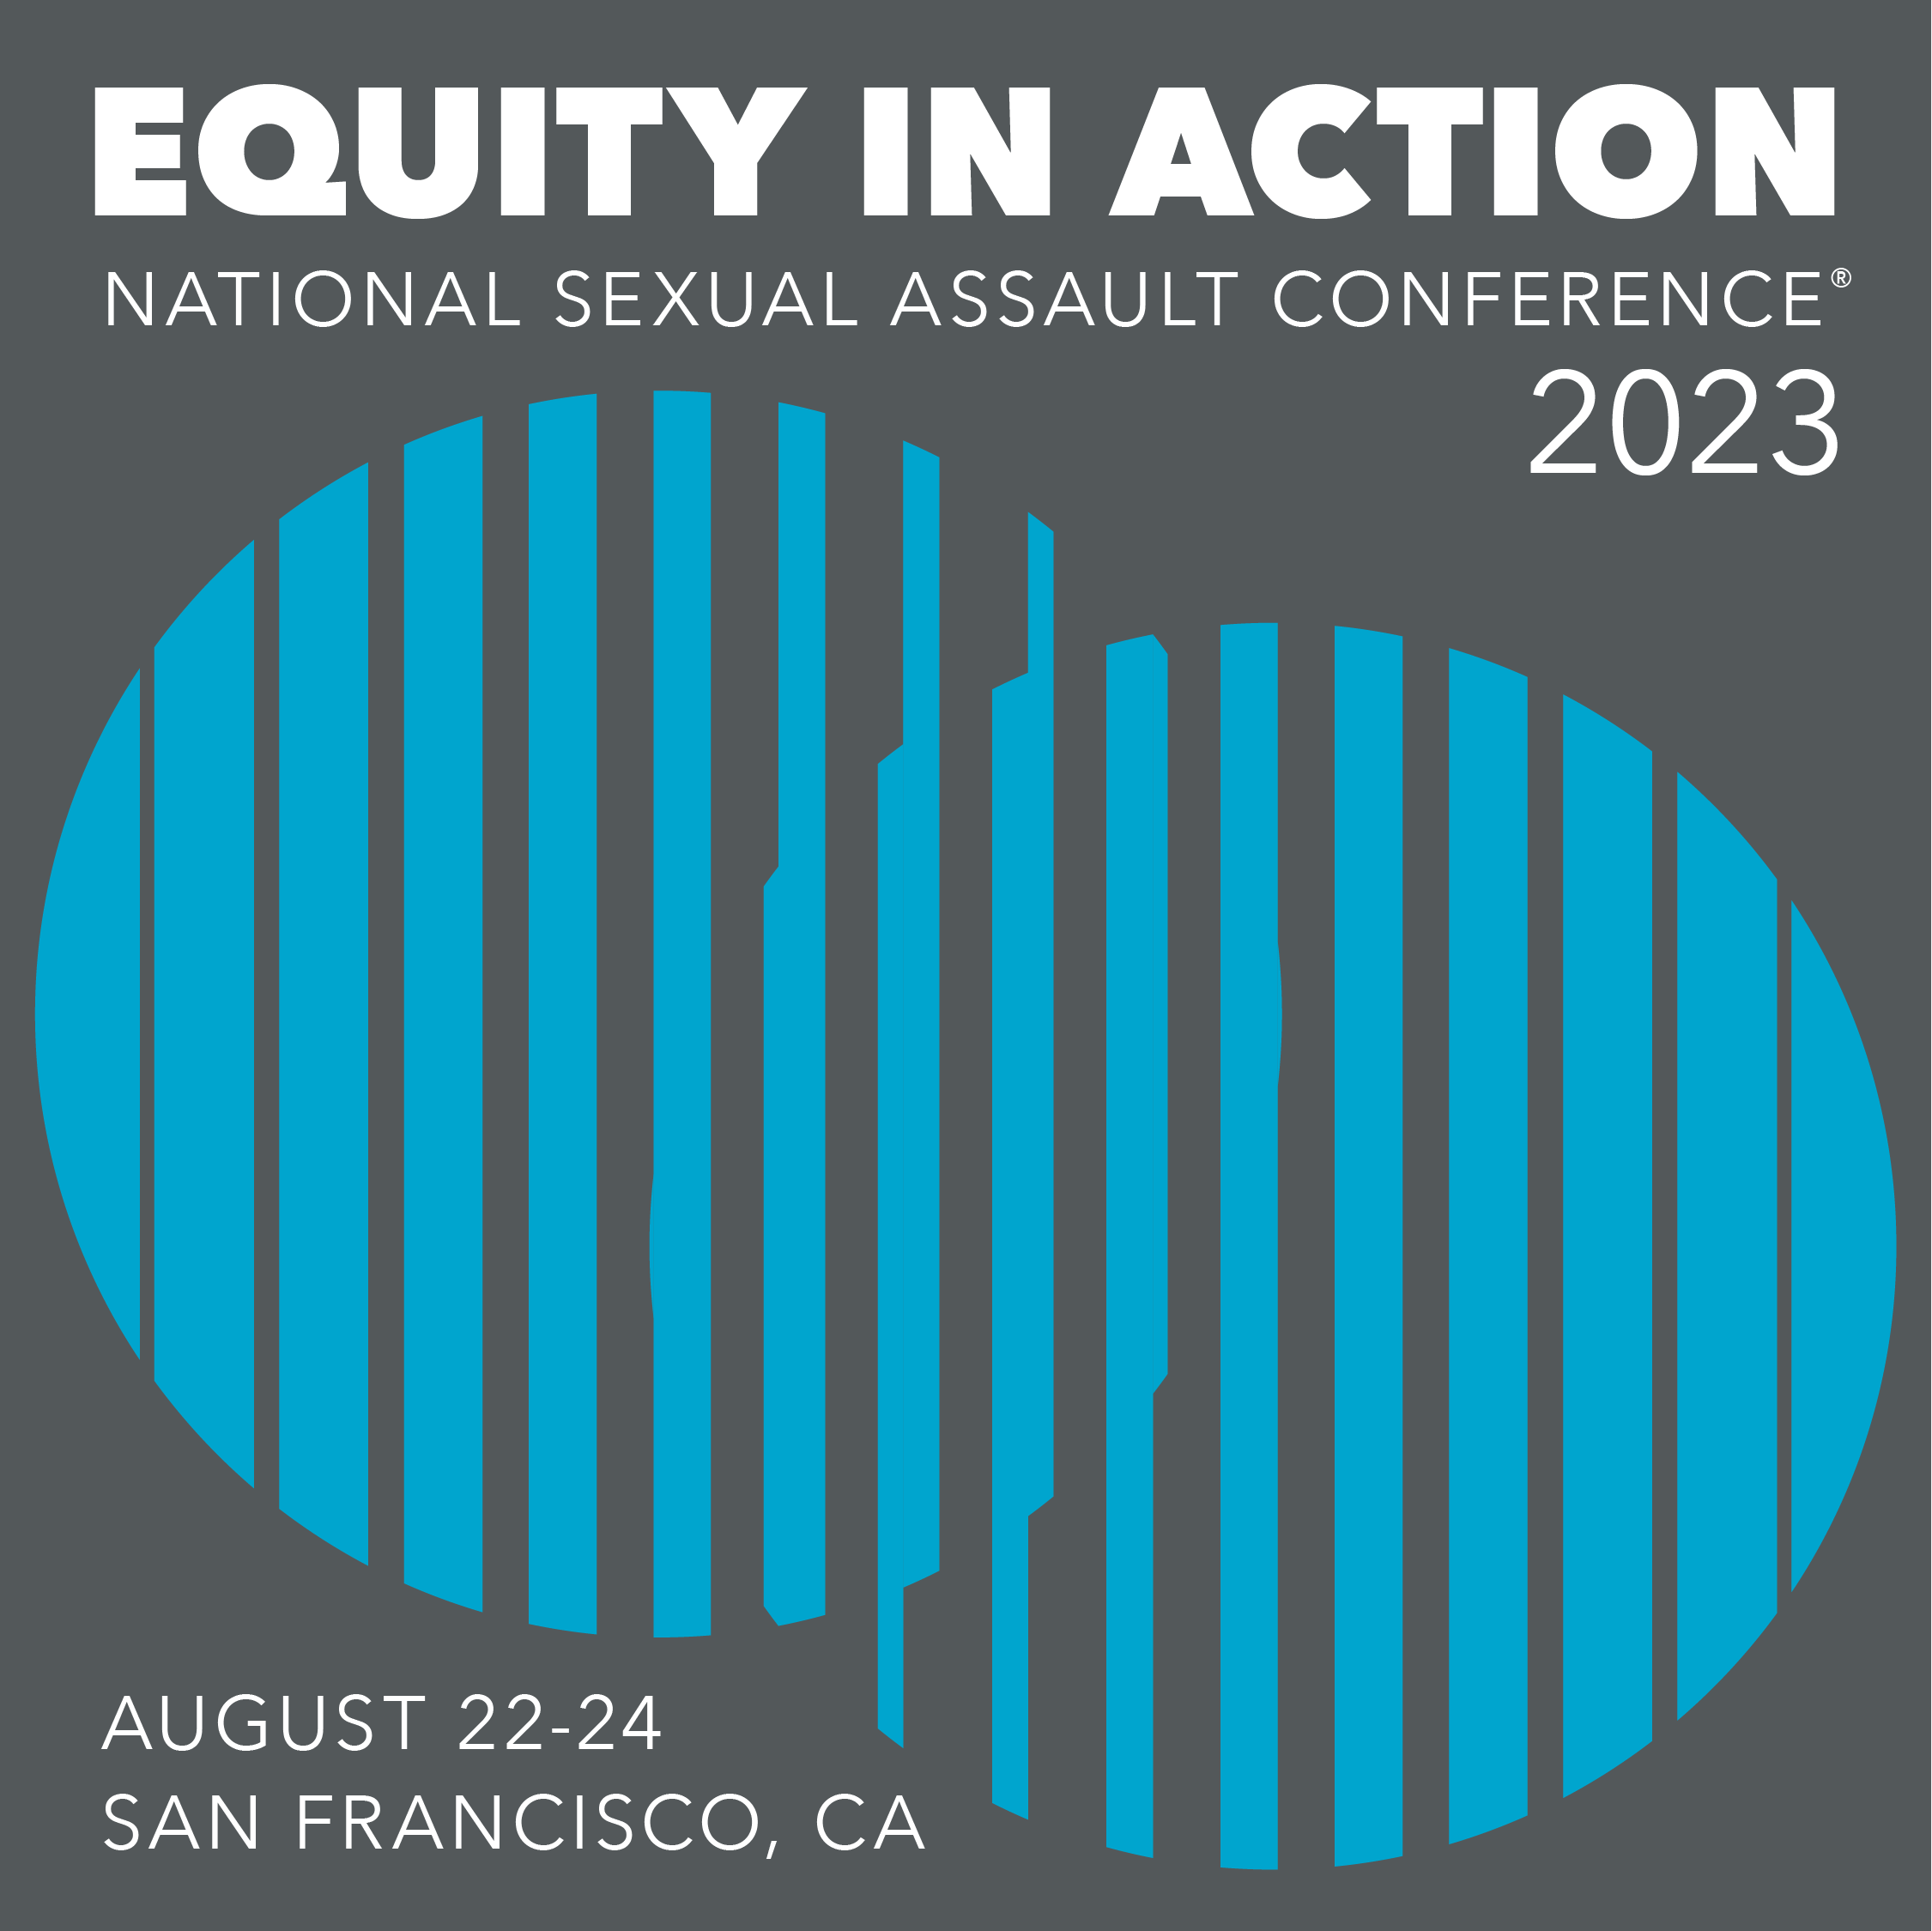 Equity in action. National sexual assault conference 2023. August 22-24. San Francisco, CA.